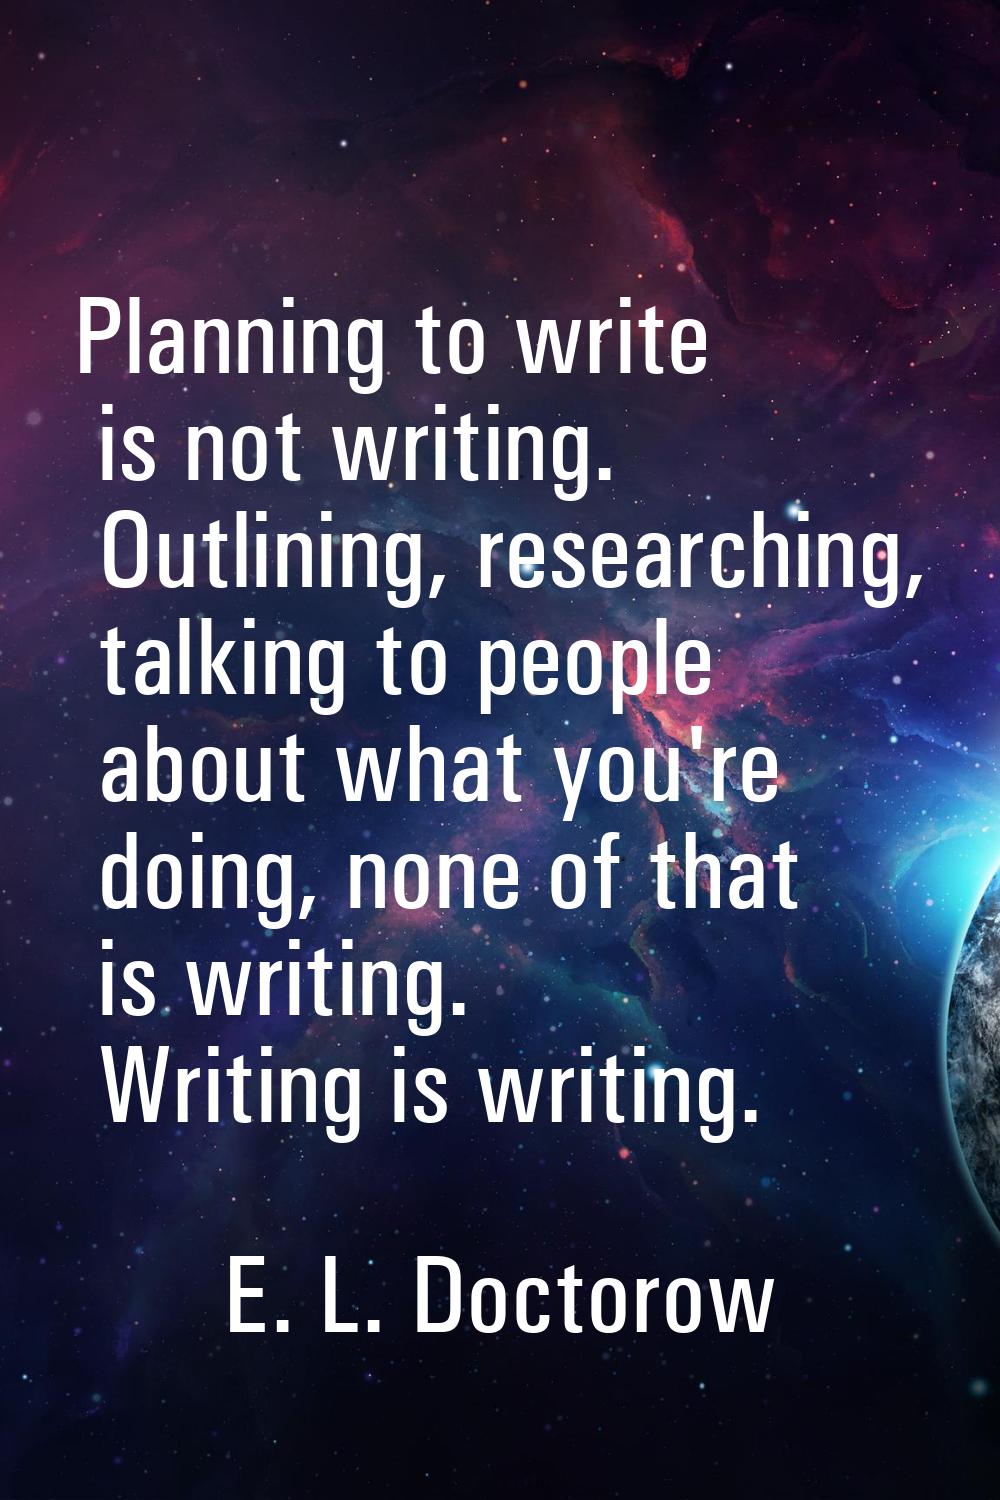 Planning to write is not writing. Outlining, researching, talking to people about what you're doing